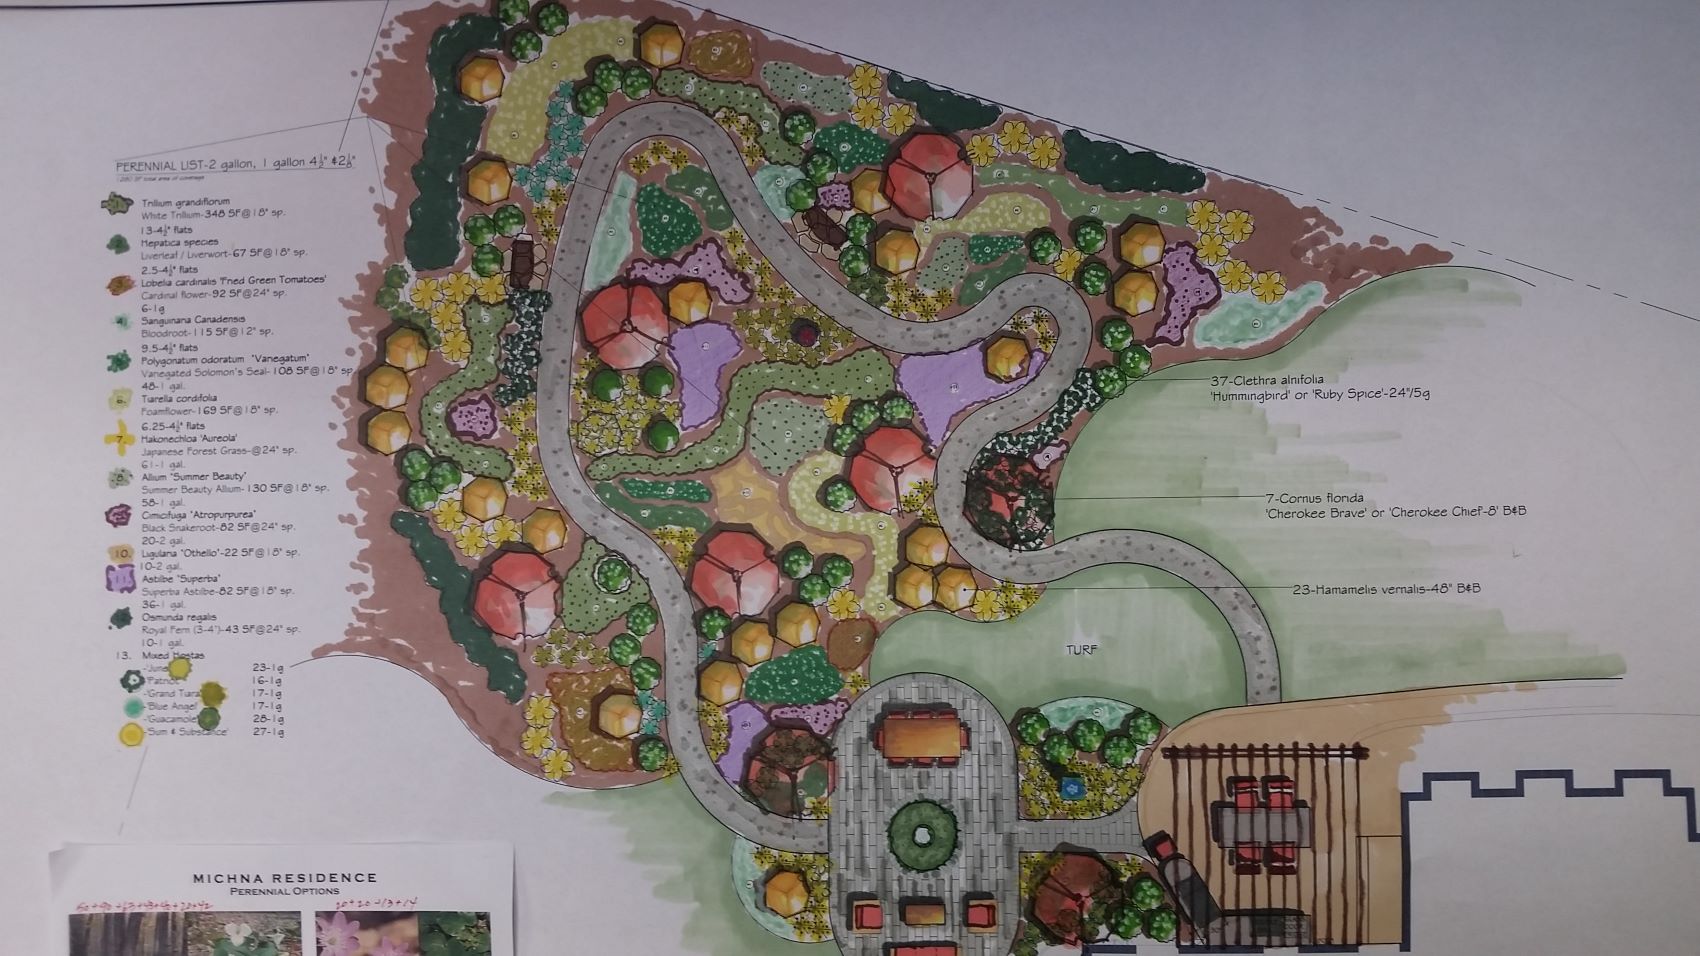 This image shows a detailed, colorful landscape design plan with plant lists and a labeled layout featuring paths, gardens, and a residential structure.